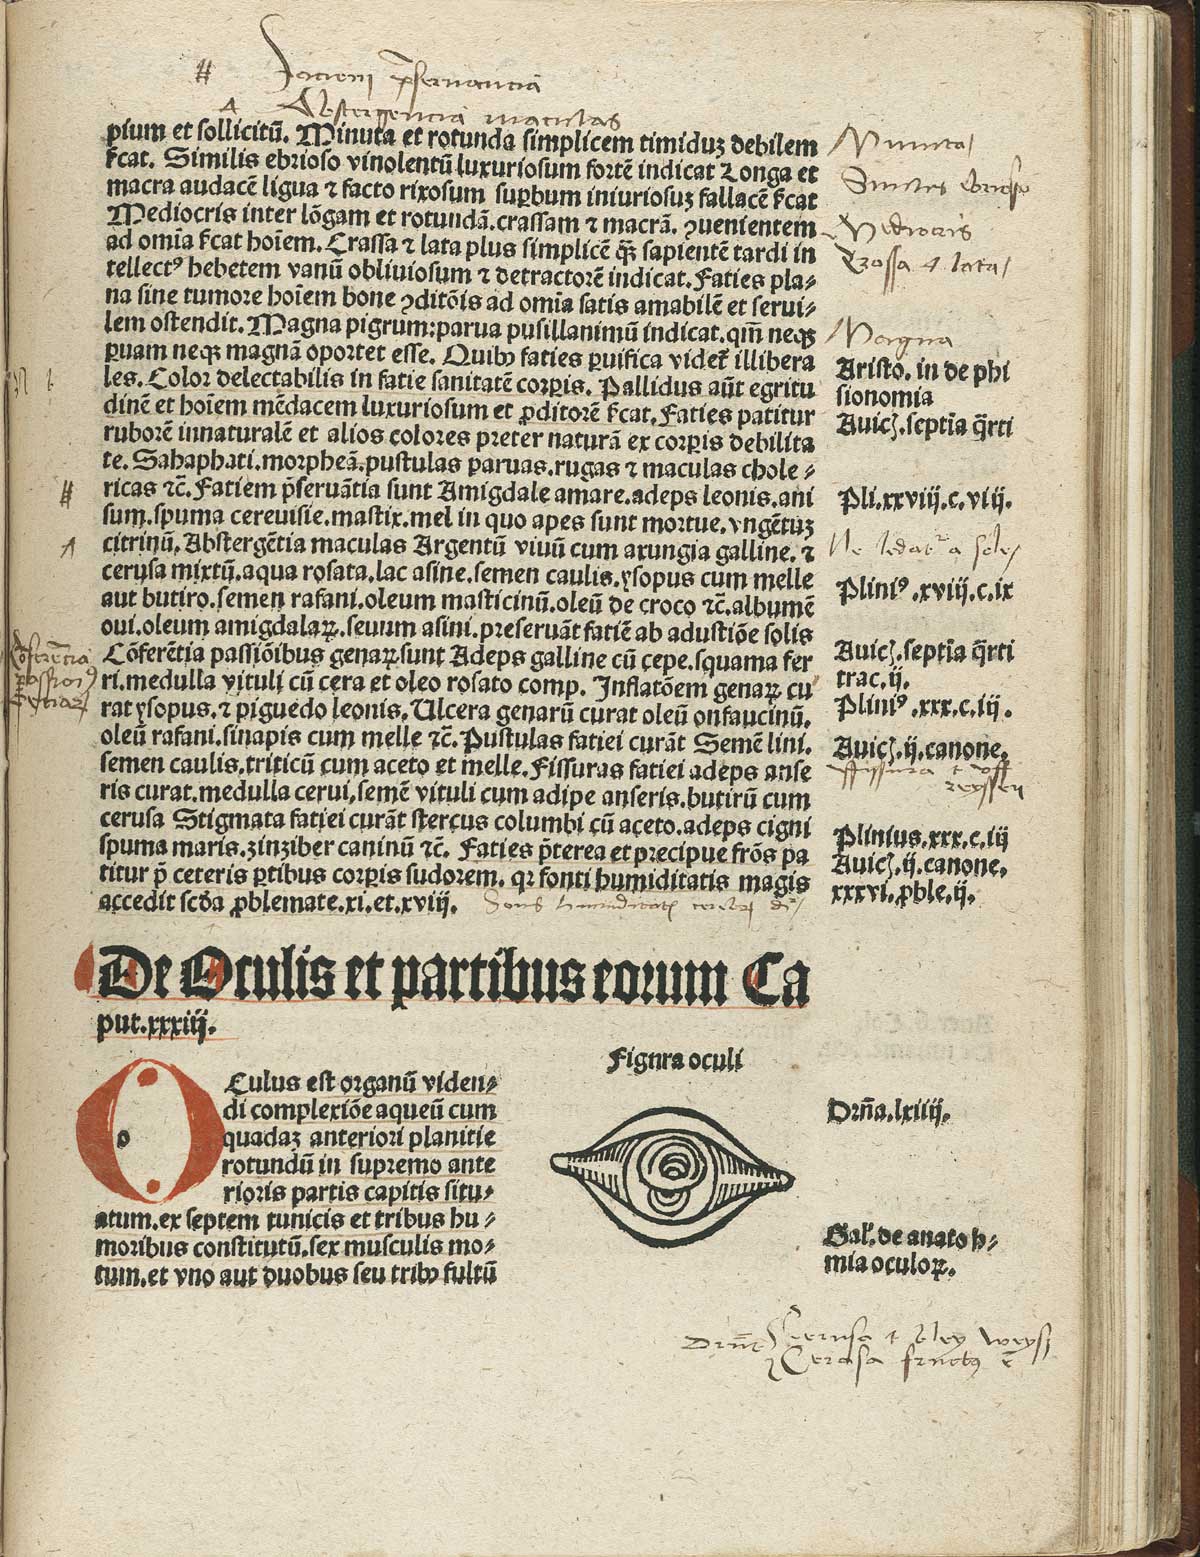 Page 87 of Magnus Hundt's Antropologium de hominis dignitate, natura et proprietatibus, de elementis, partibus et membris humani corporis, featuring an illustration of an eye in the bottom right corner of the page as well as handwritten commentary in the margins.